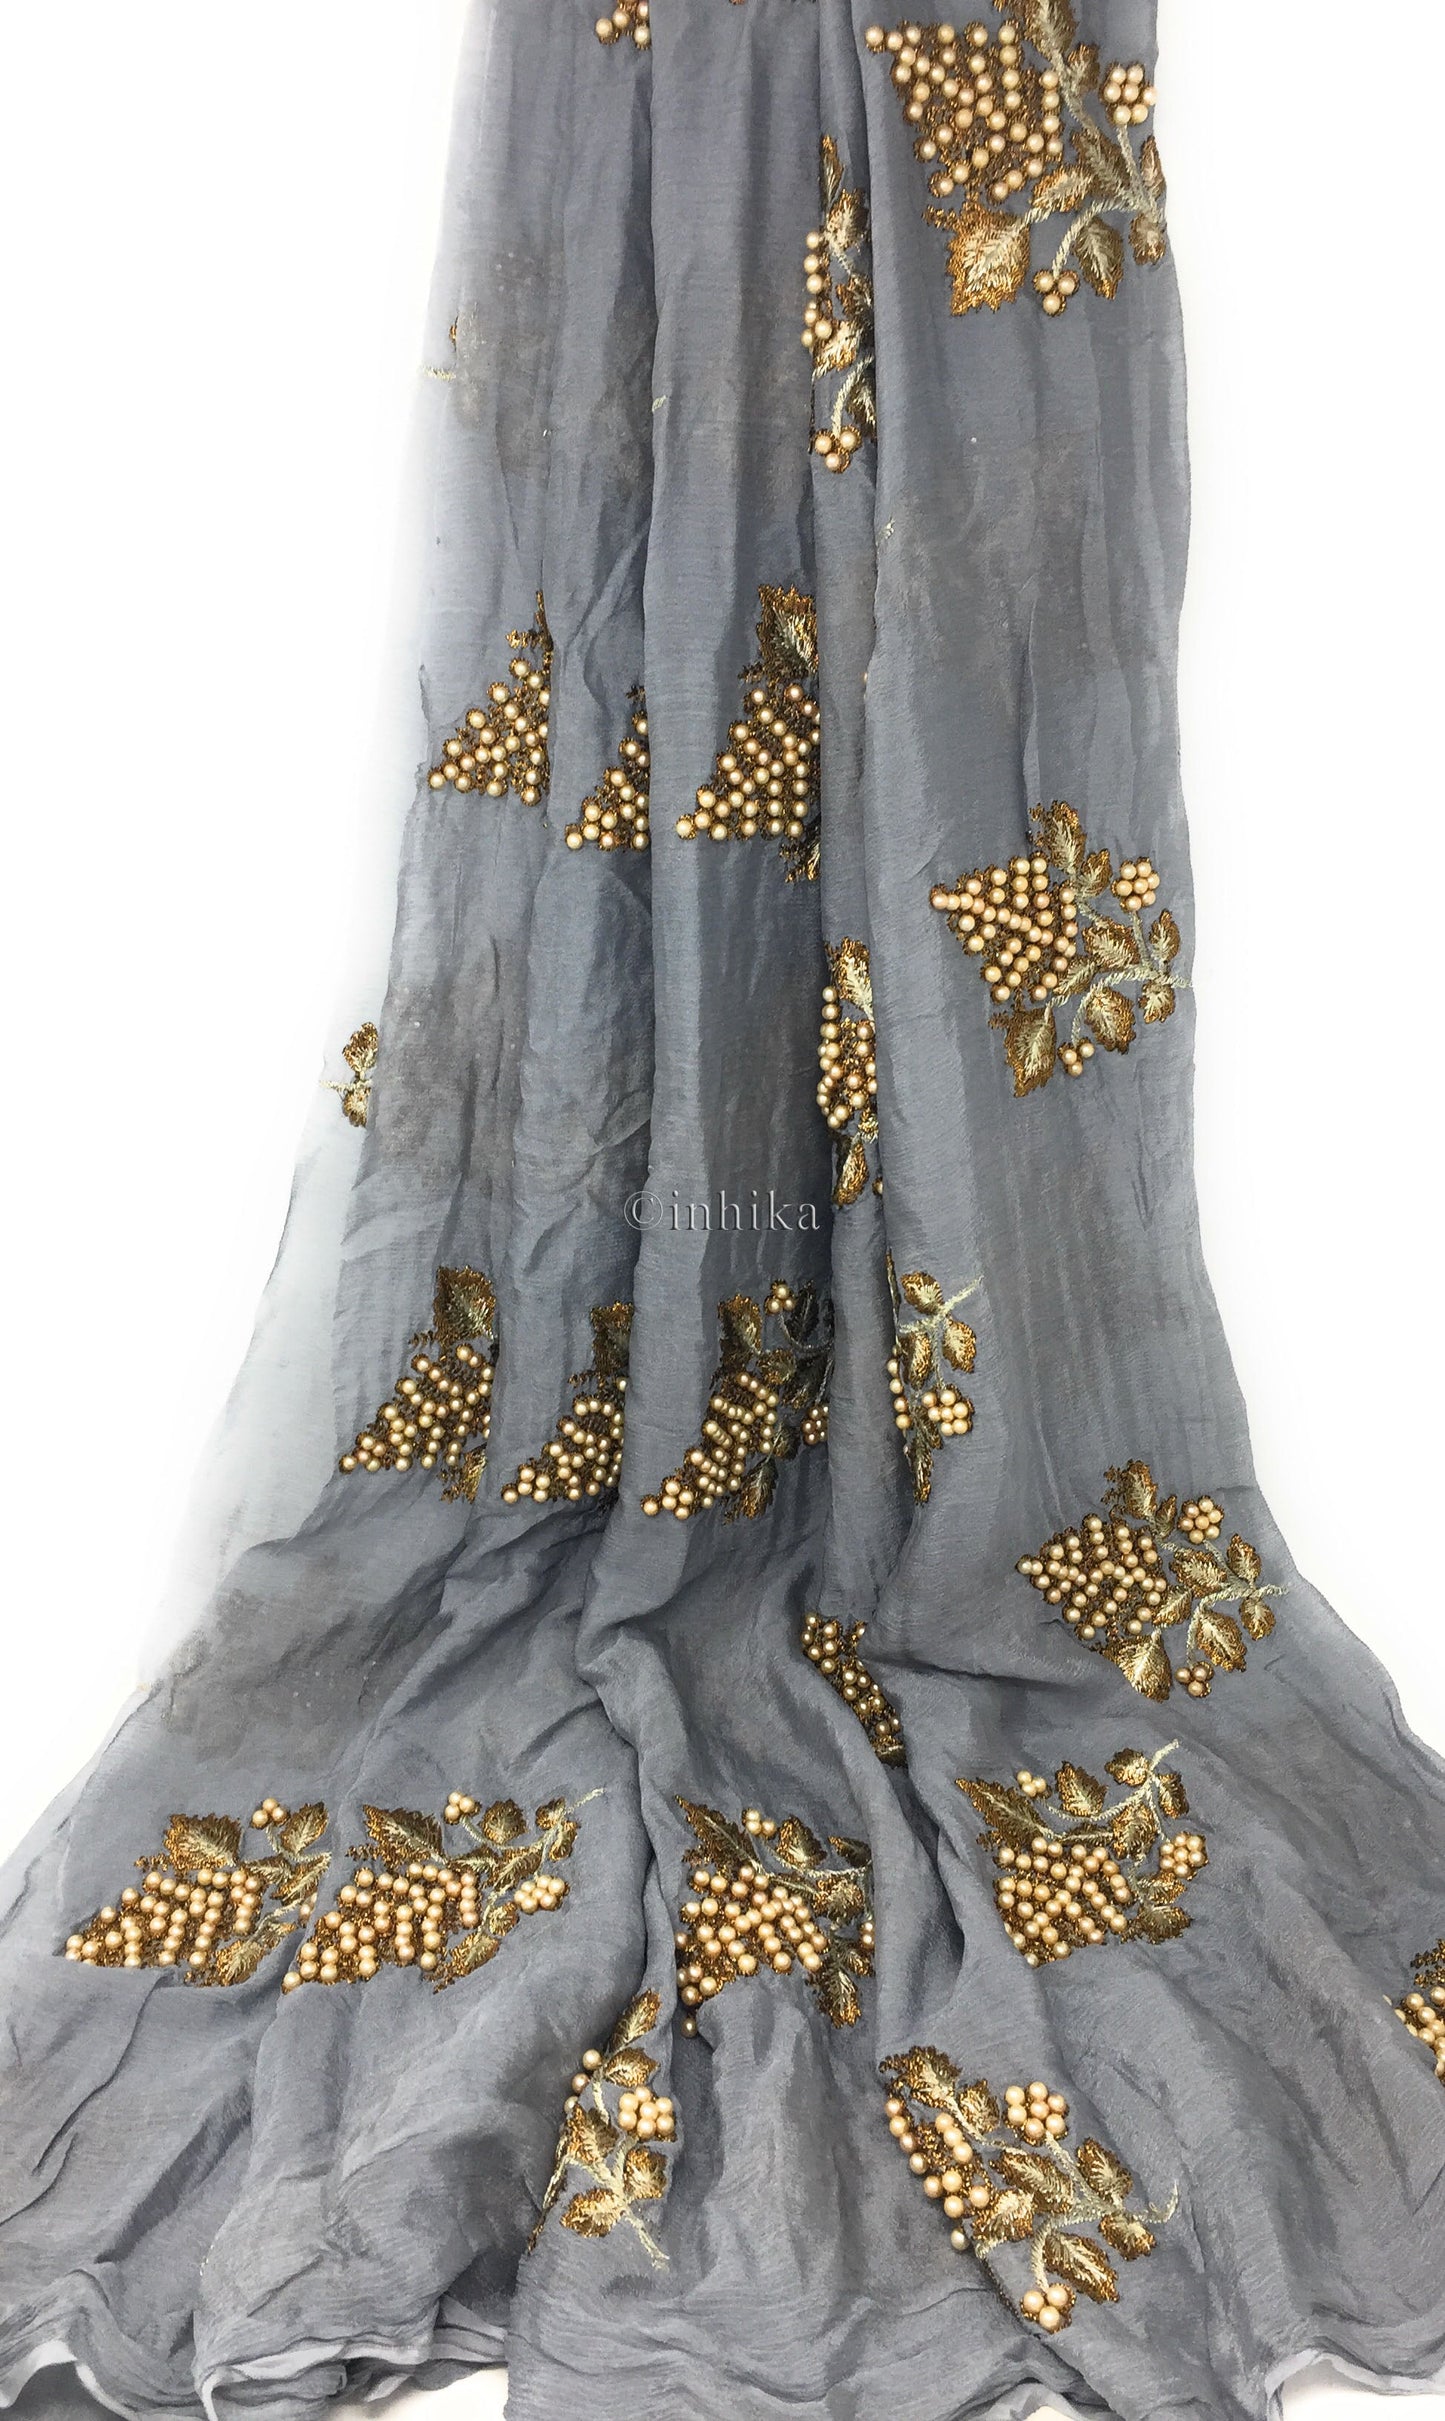 Grey Chiffon Fabric Material with embroidery